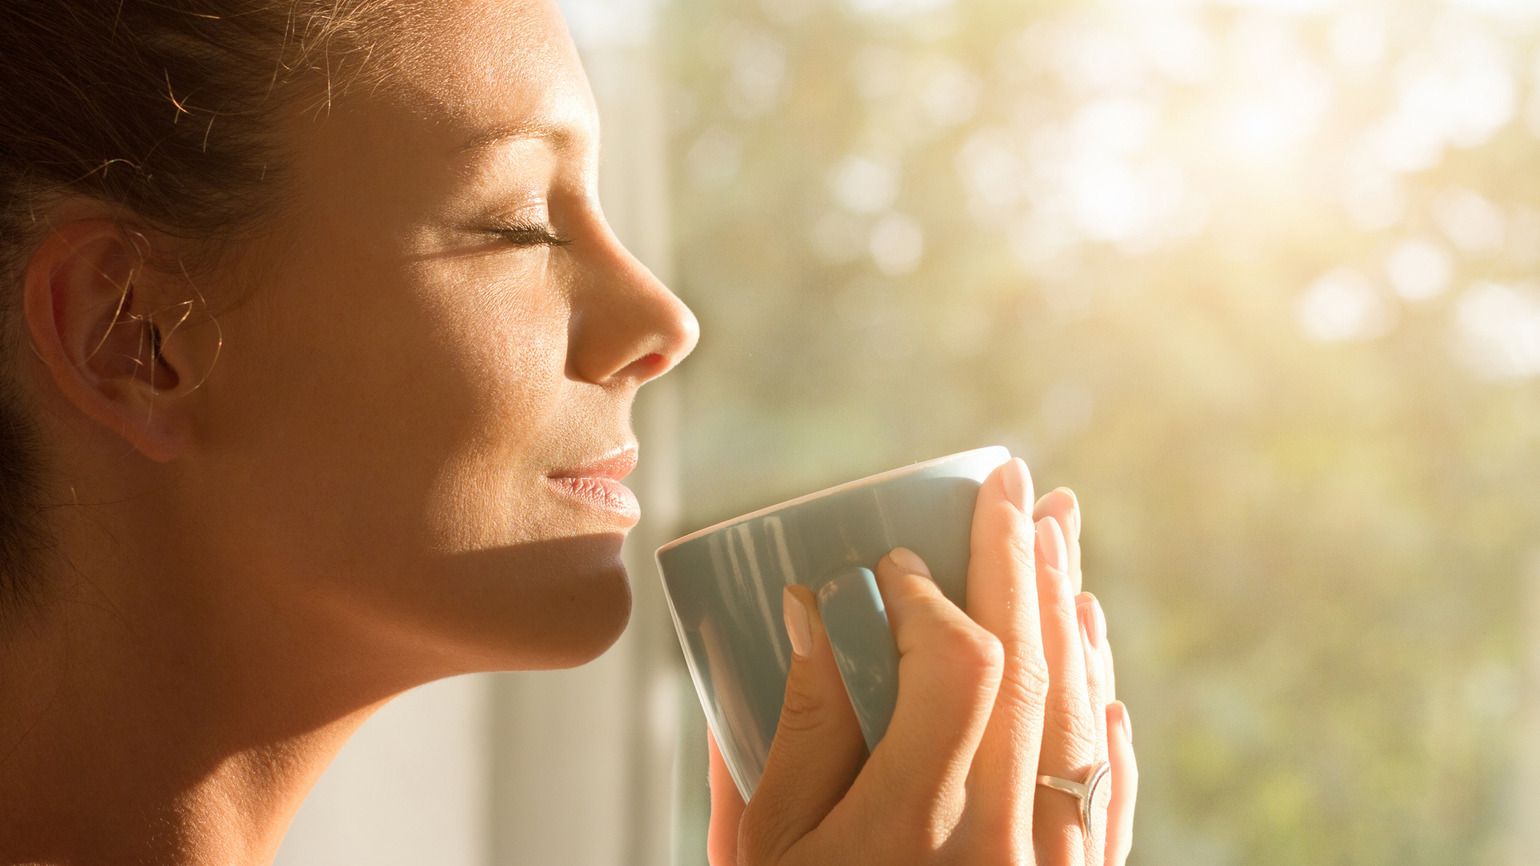 A woman having a cup of coffee in the morning sunlight thinking of God's hands